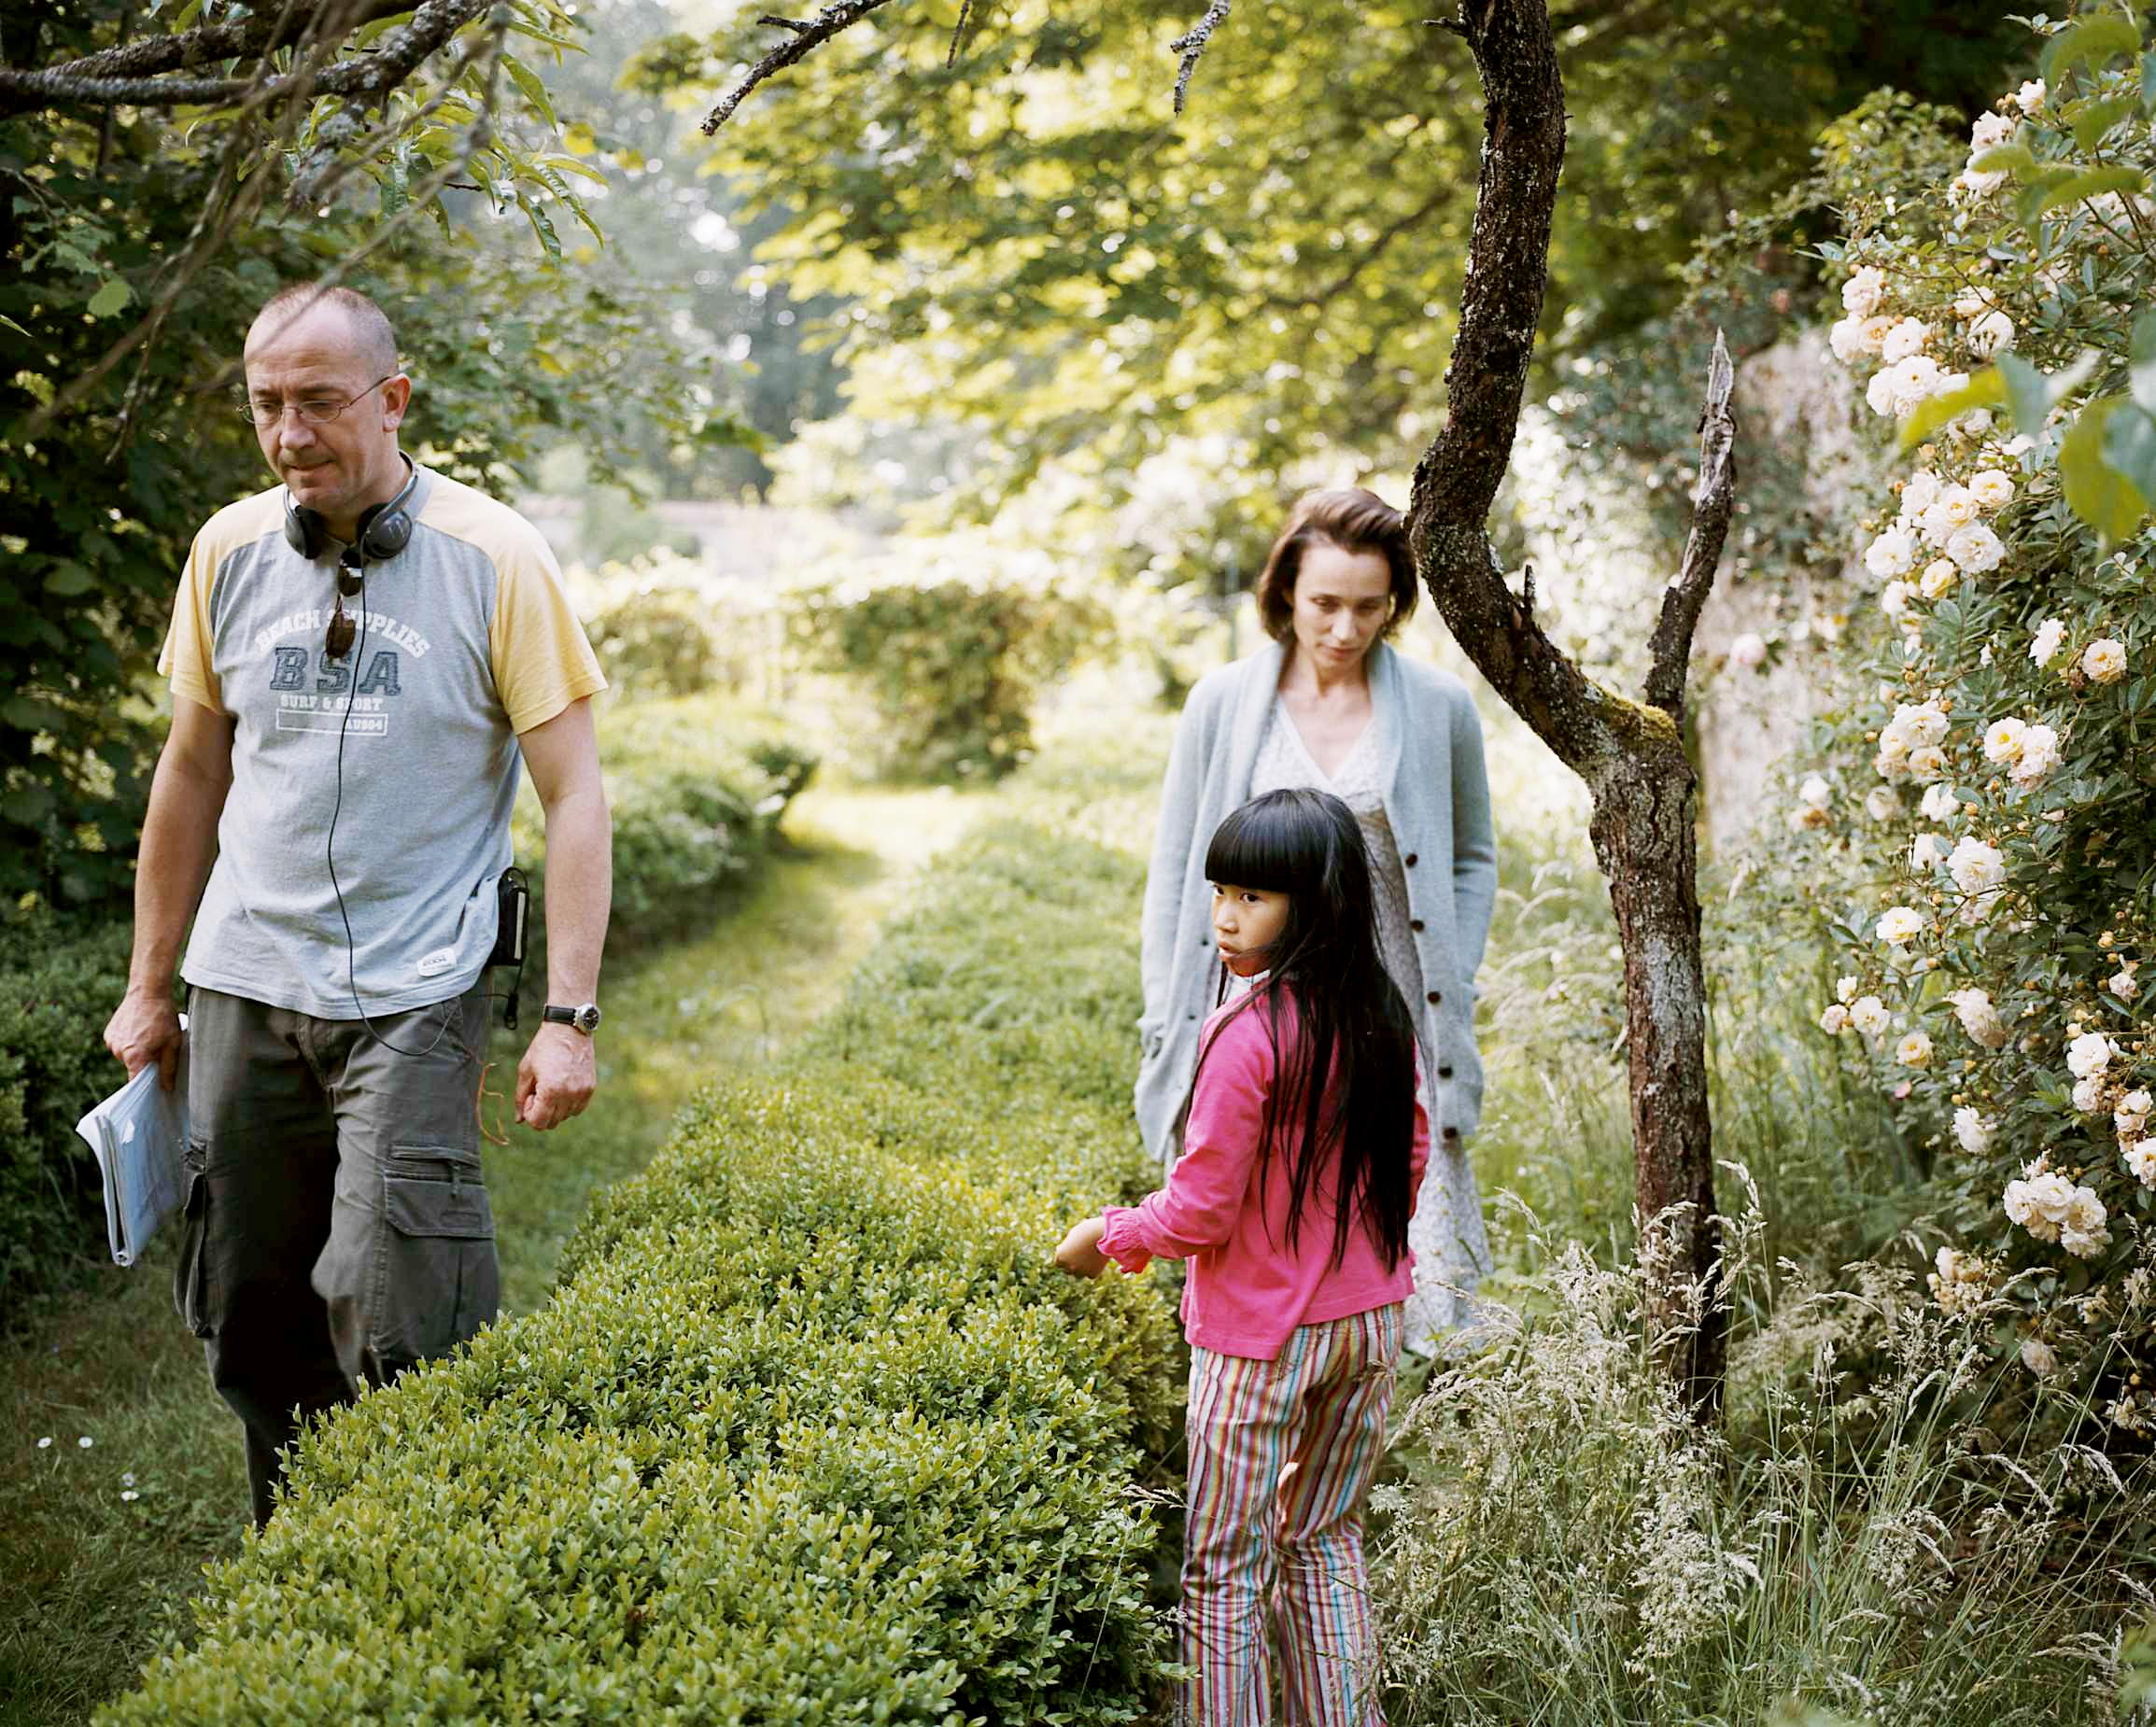 Philippe Claudel, Kristin Scott Thomas and Lise Segur in Sony Pictures Classics' I've Loved You So Long (2008). Photo credit by Thierry Valletoux.